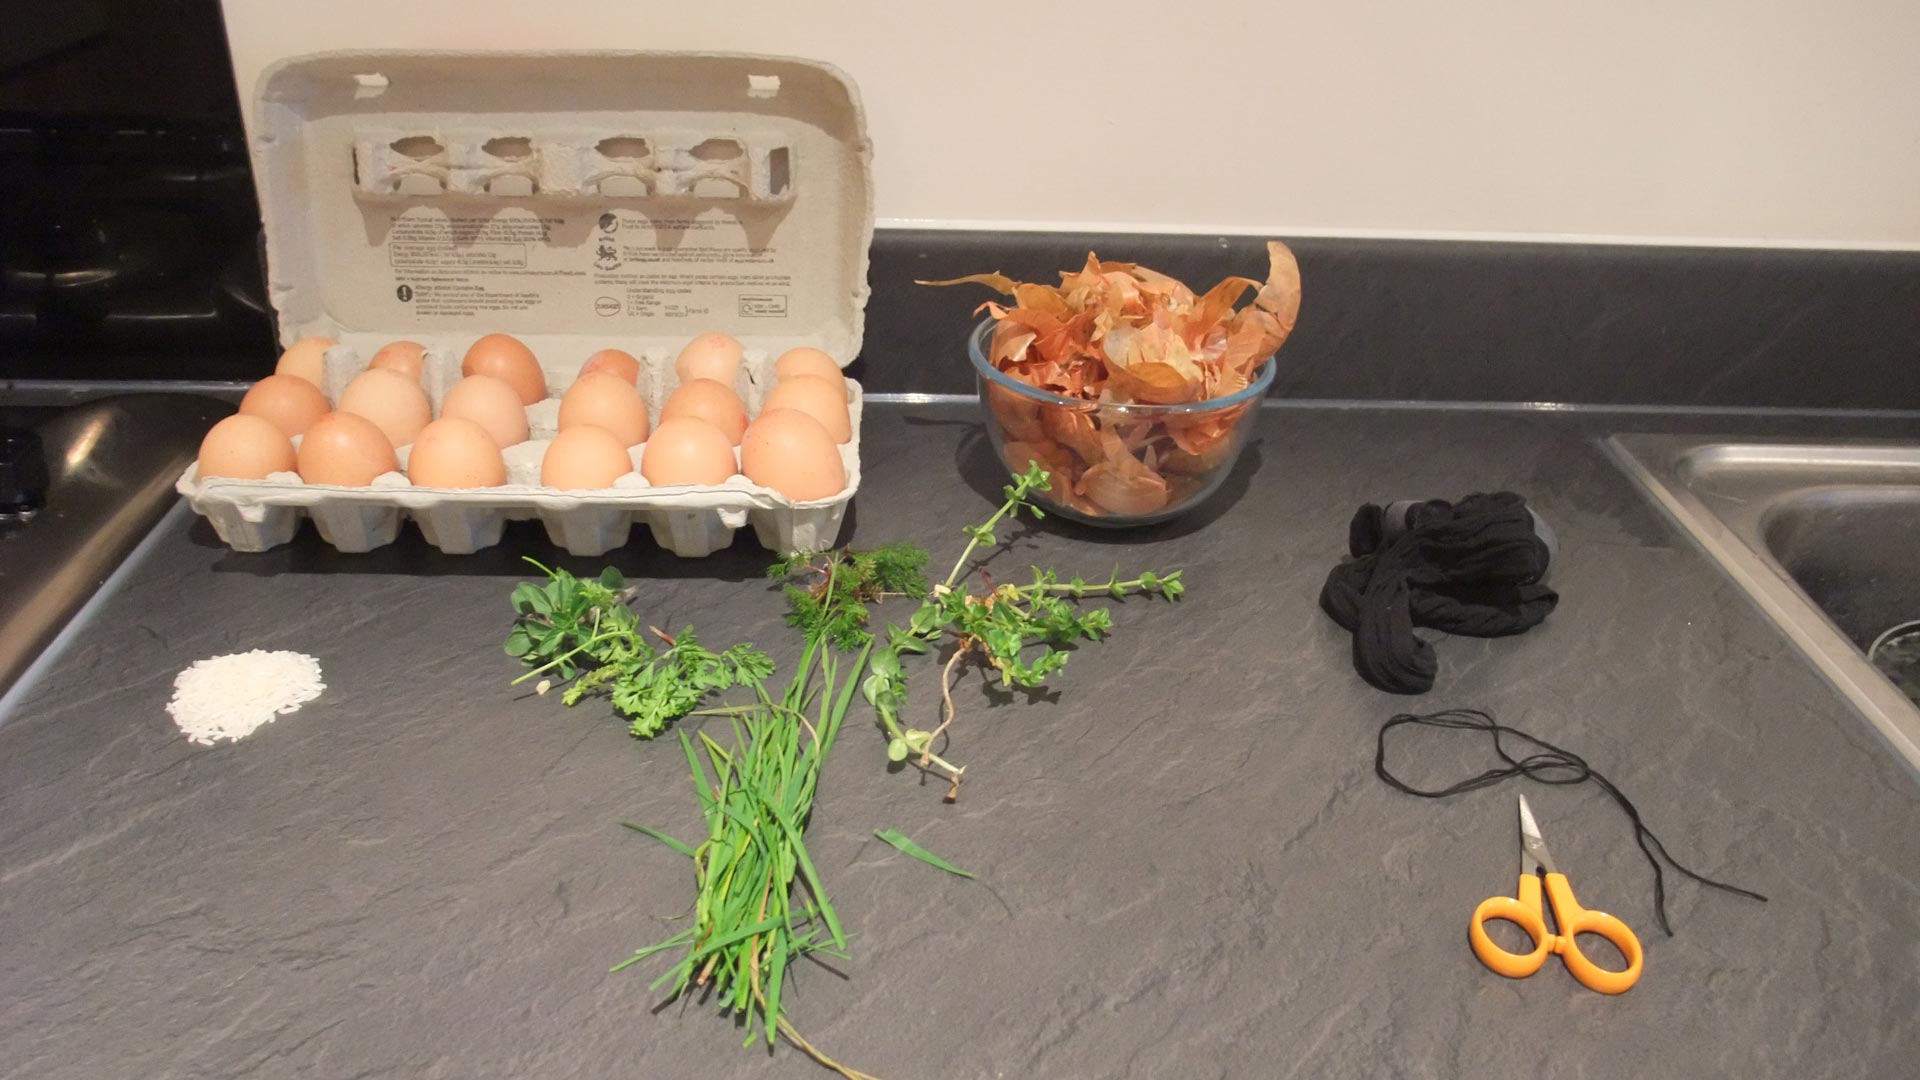 Eggs with bits for decoration